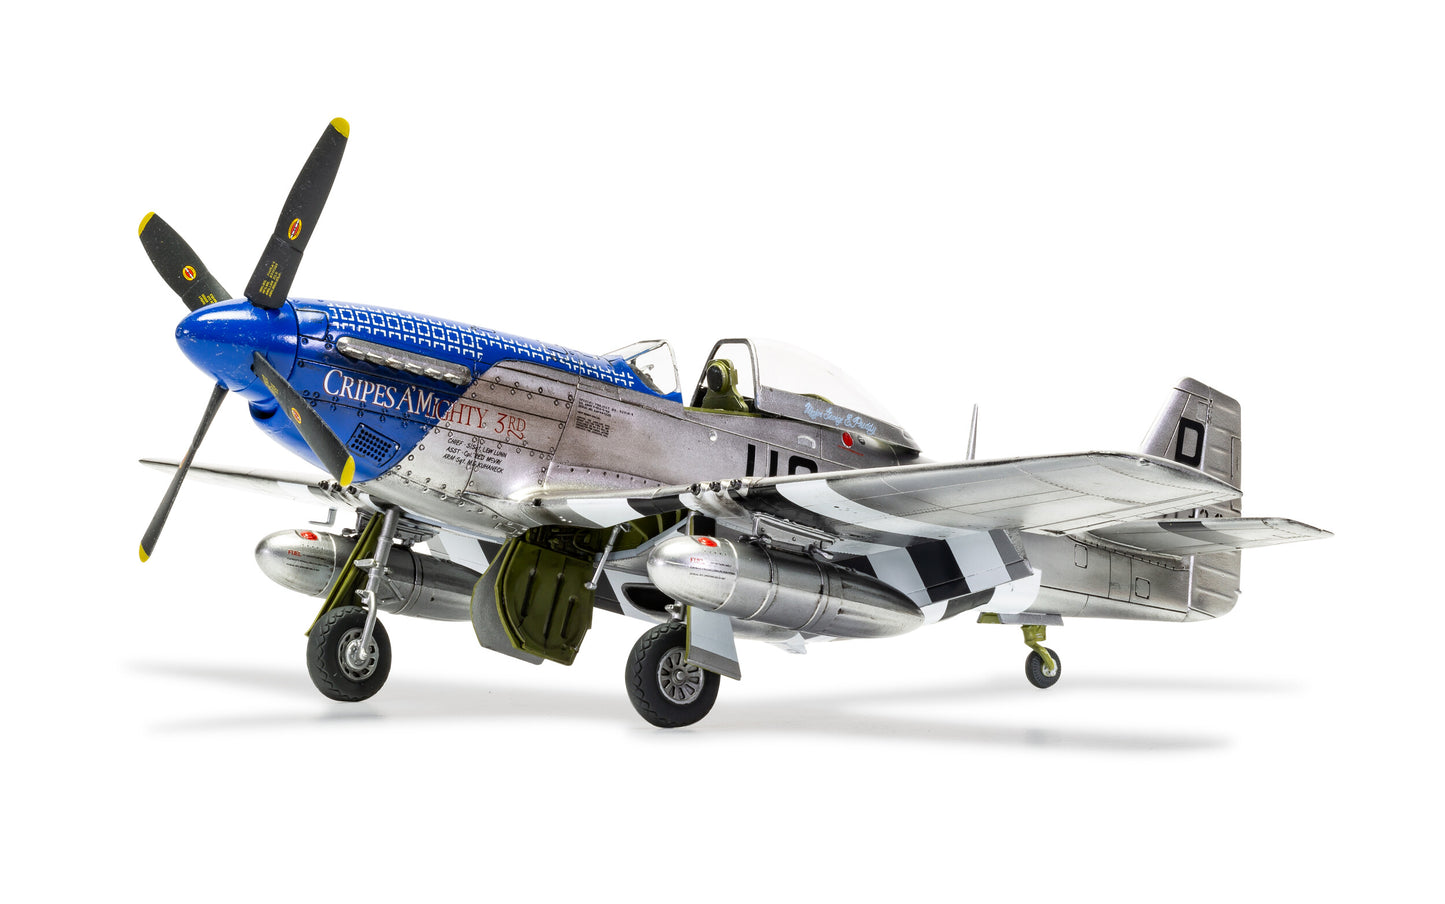 Airfix 1/48th scale North American P51-D Mustang (Filletless Tails)